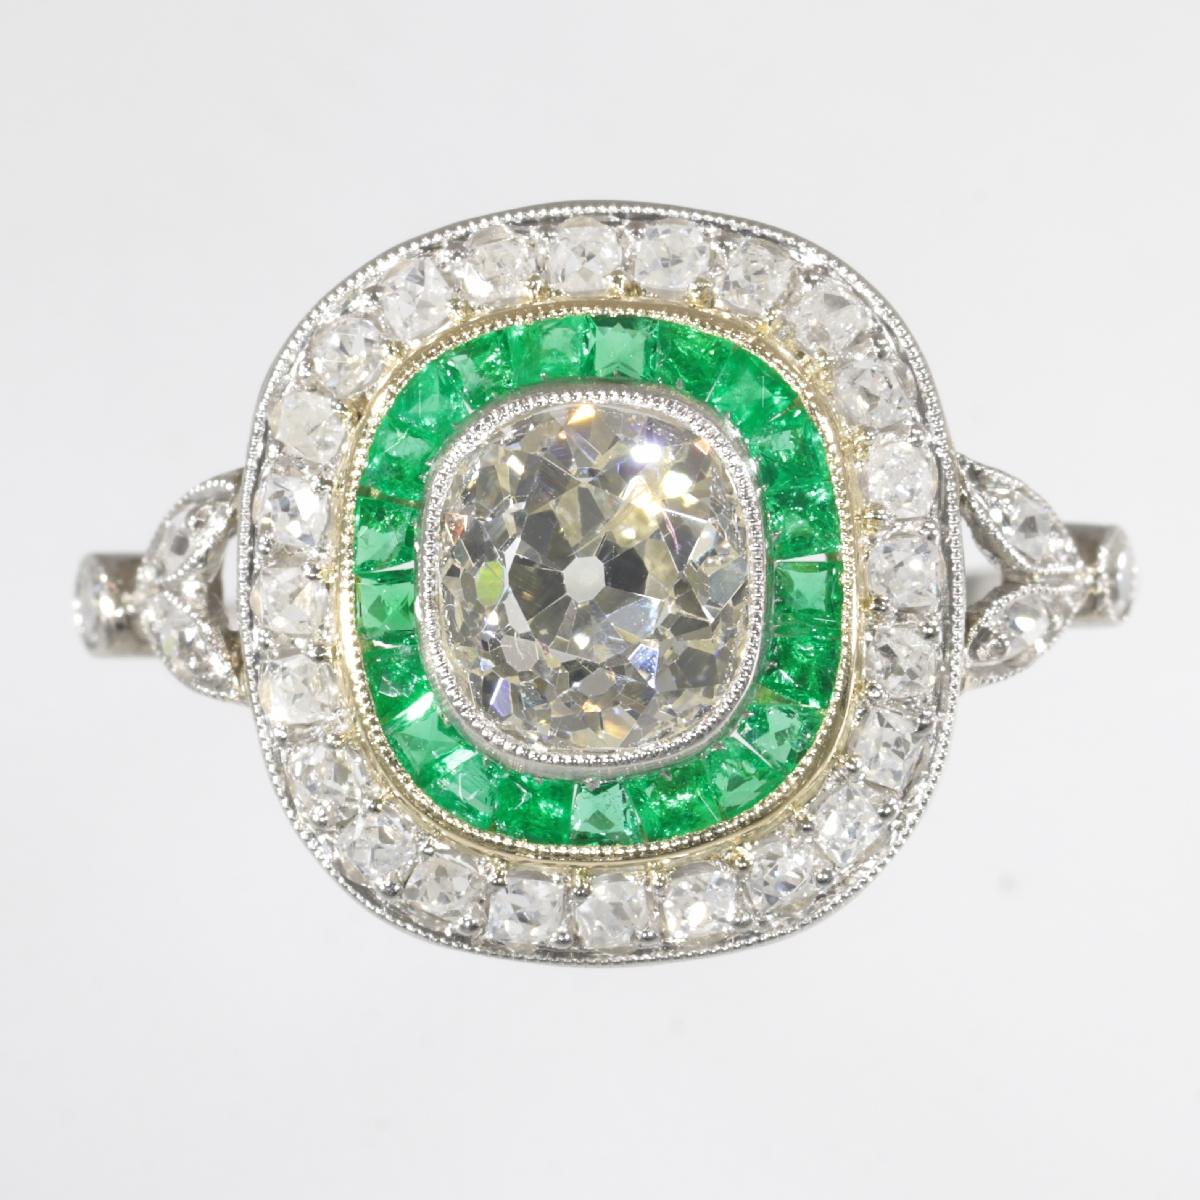 Antique jewelry object group: ring

Condition: very good condition

Ring size Continental: 55 & 17½ , Size US 7¼ , Size UK: O
- Free resizing (only for extreme resizing we have to charge).

Do you wish for a 360° view of this unique jewel?
Just send